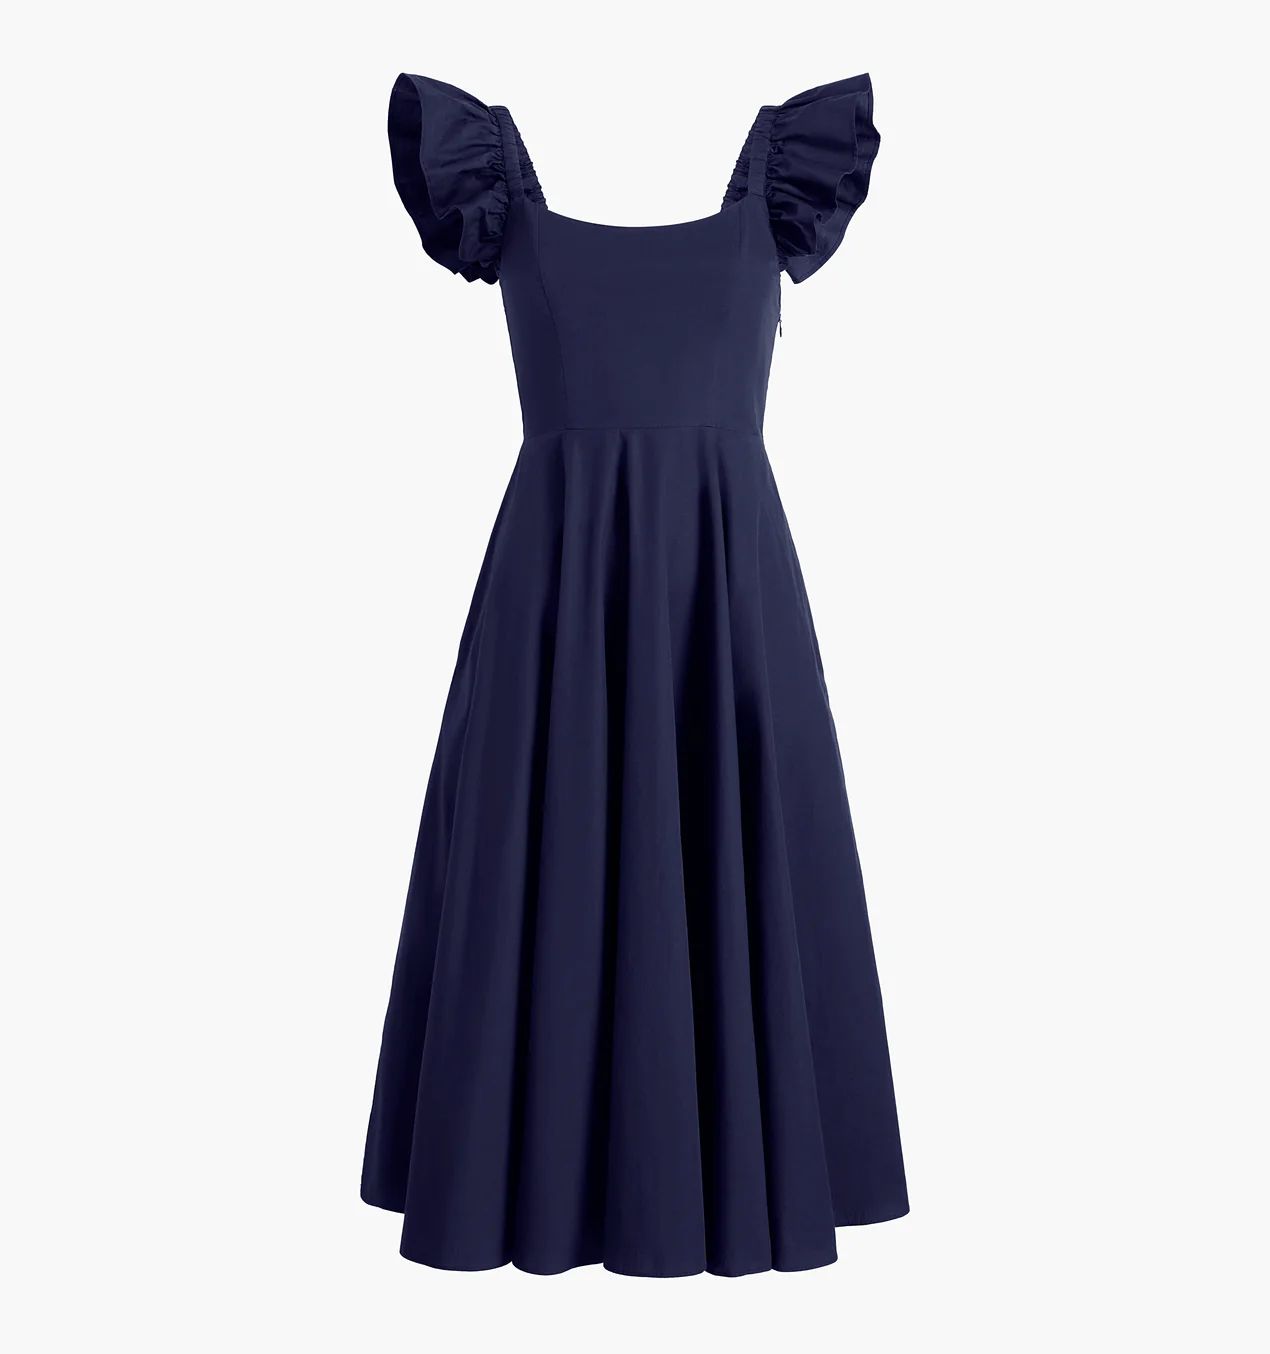 The Daphne Dress - Navy Cotton | Hill House Home